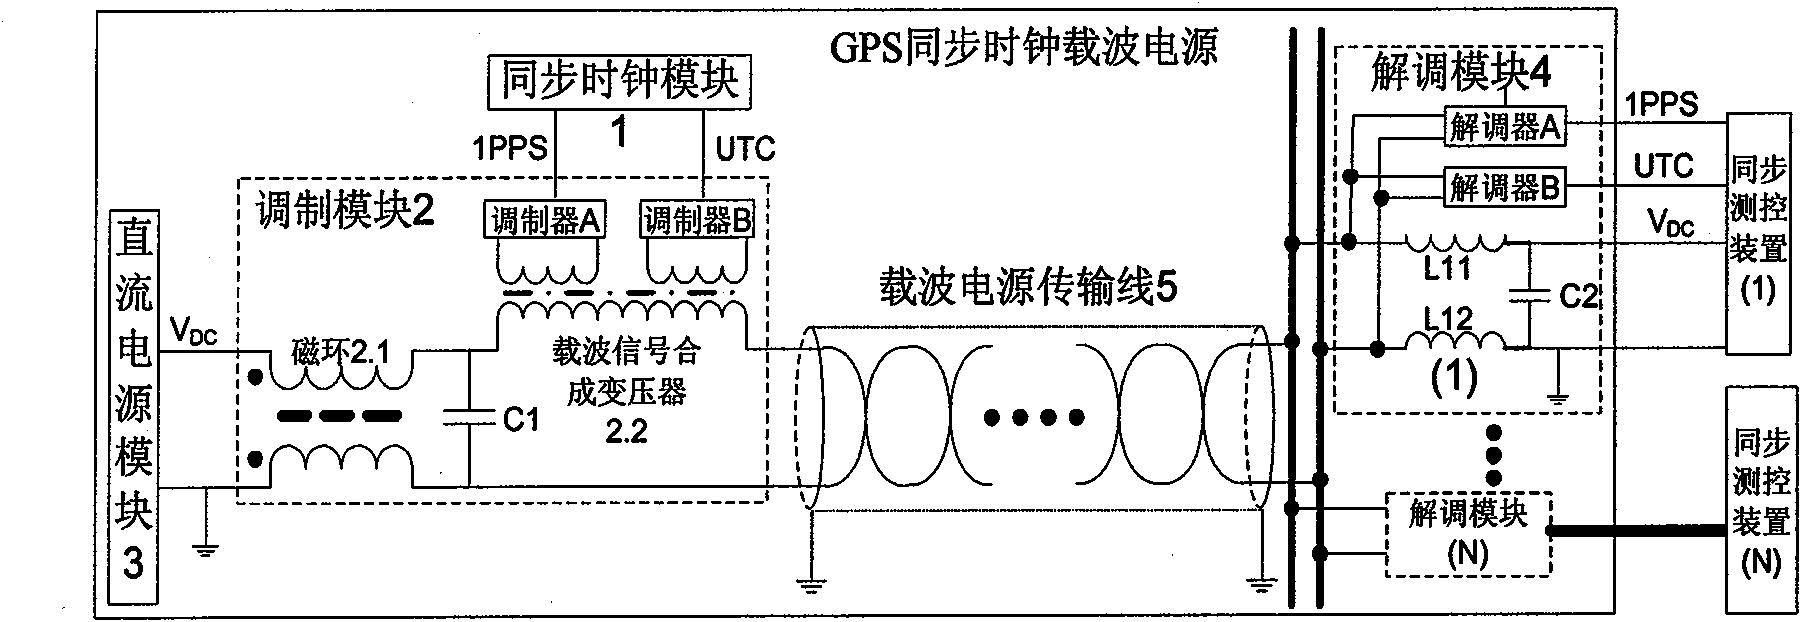 GPS synchronous clock carrier power source